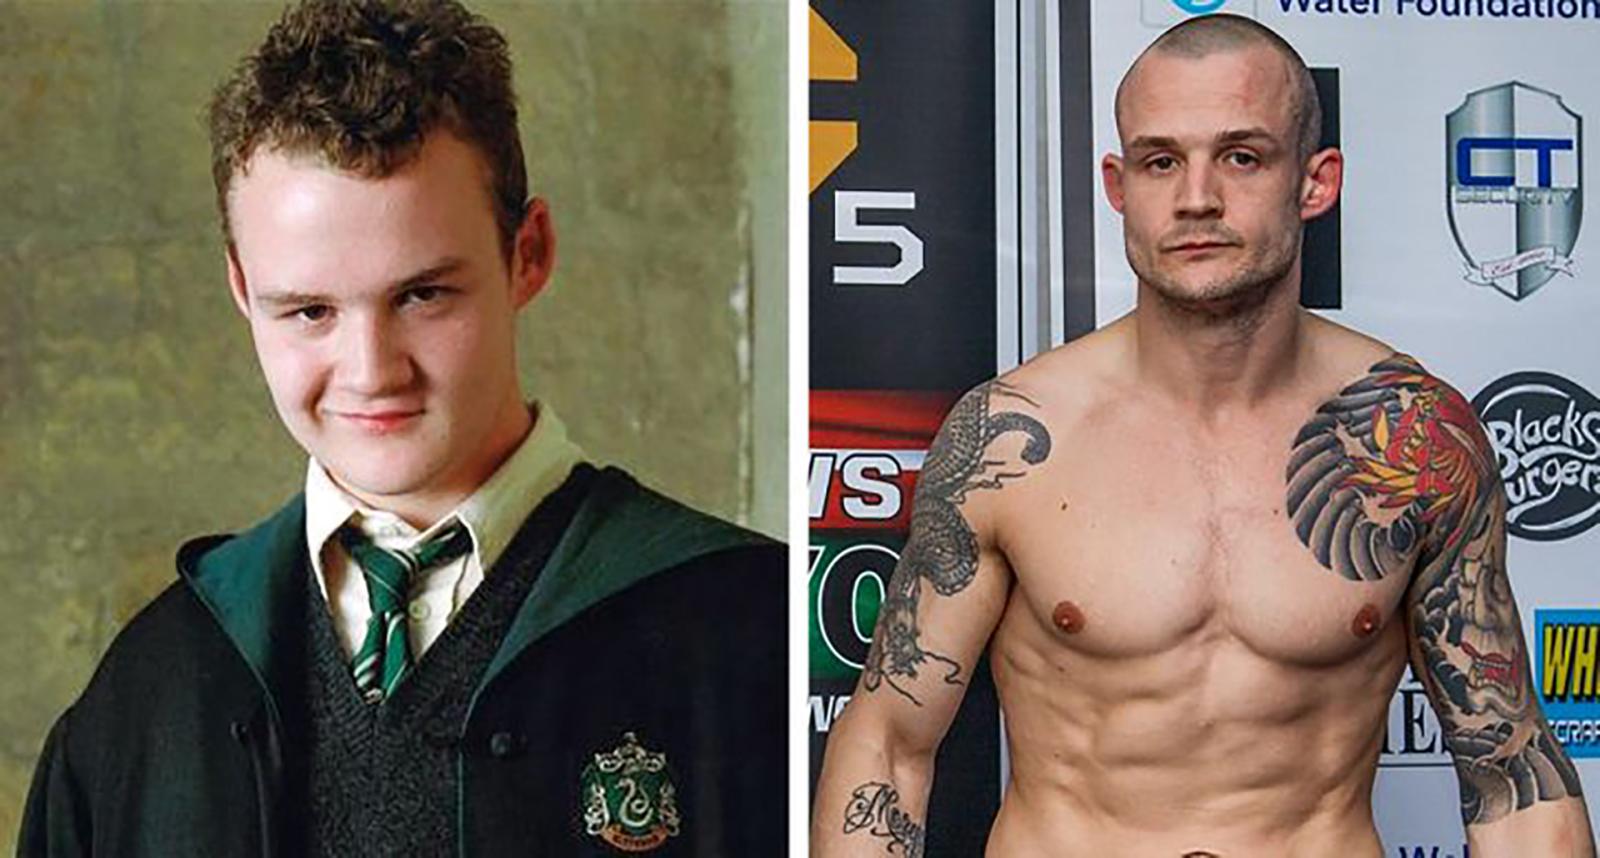 20 Years On: Here's What The Cast of Harry Potter Look Like Now - image 1